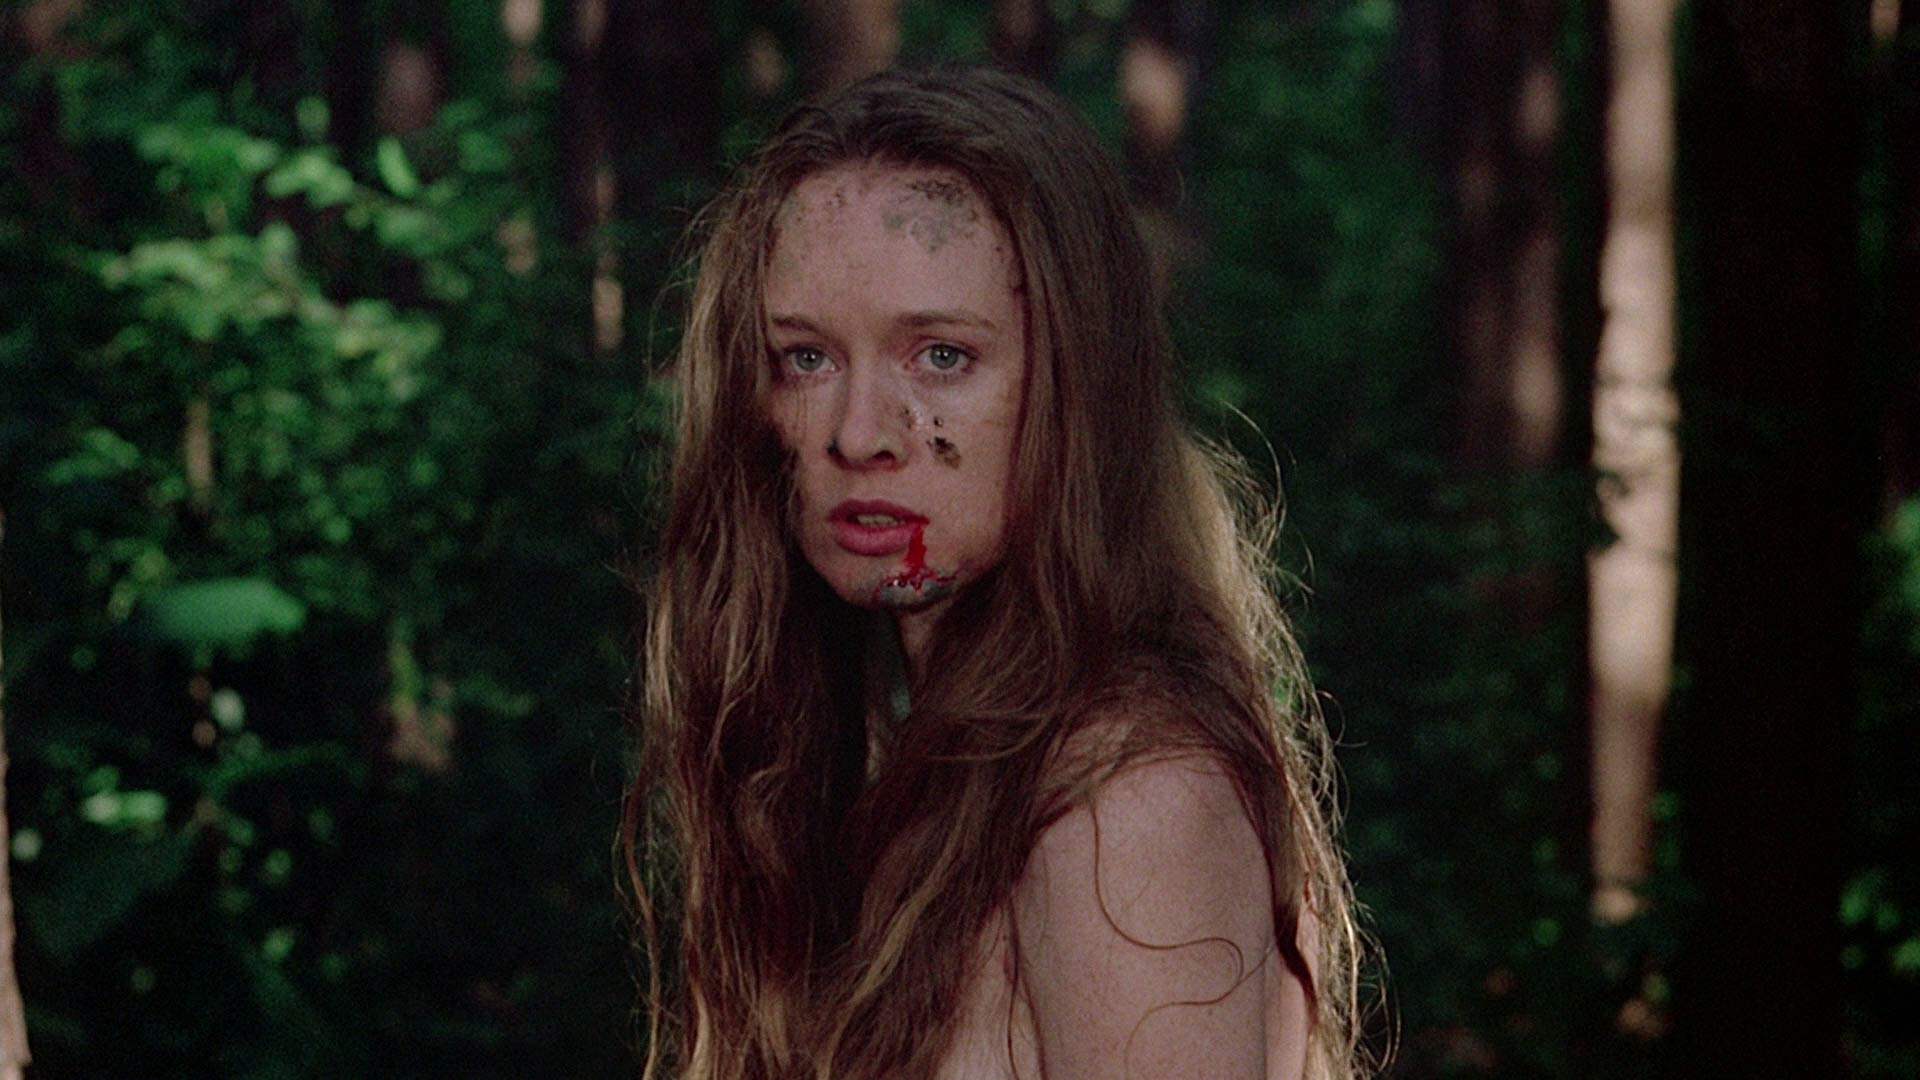 A dirty and bloody Jennifer wanders the woods after being assaulted in I Spit on Your Grave.